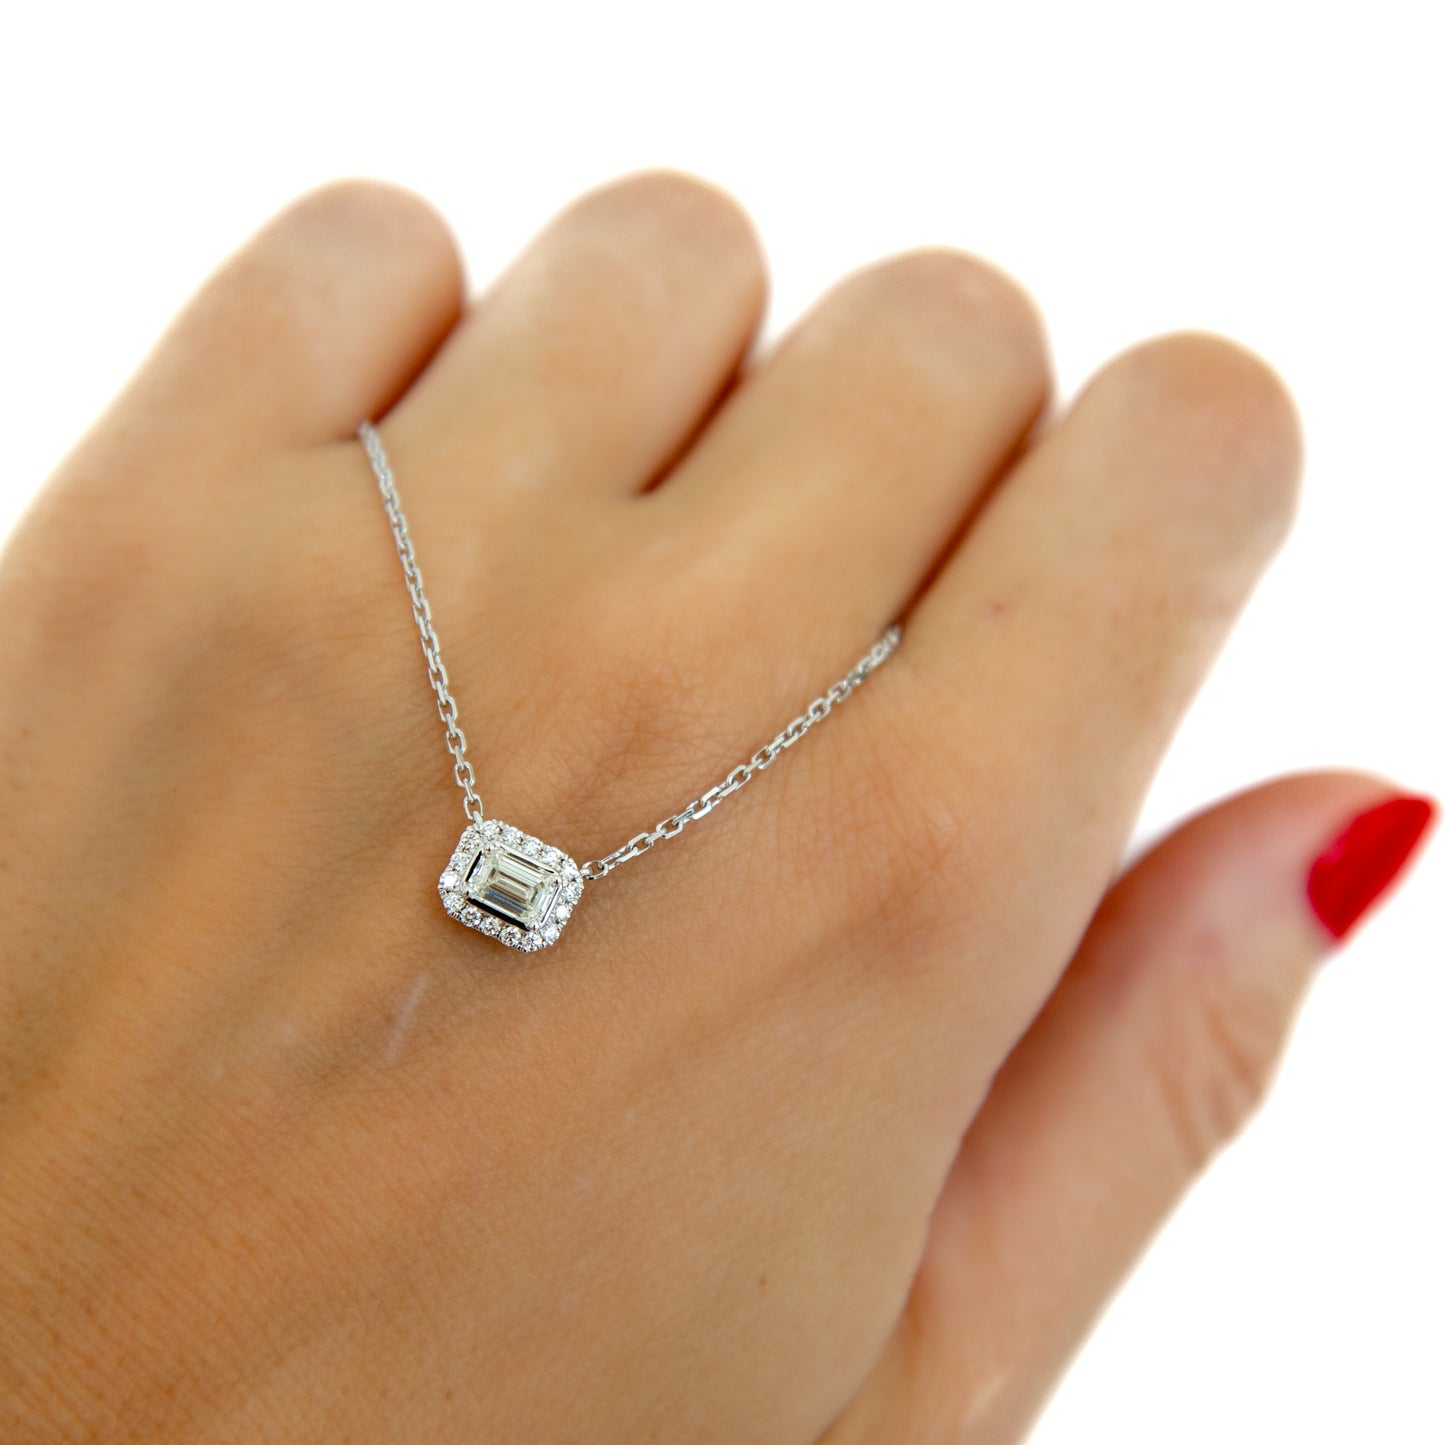 Emerald cut diamond and halo necklace in White Gold